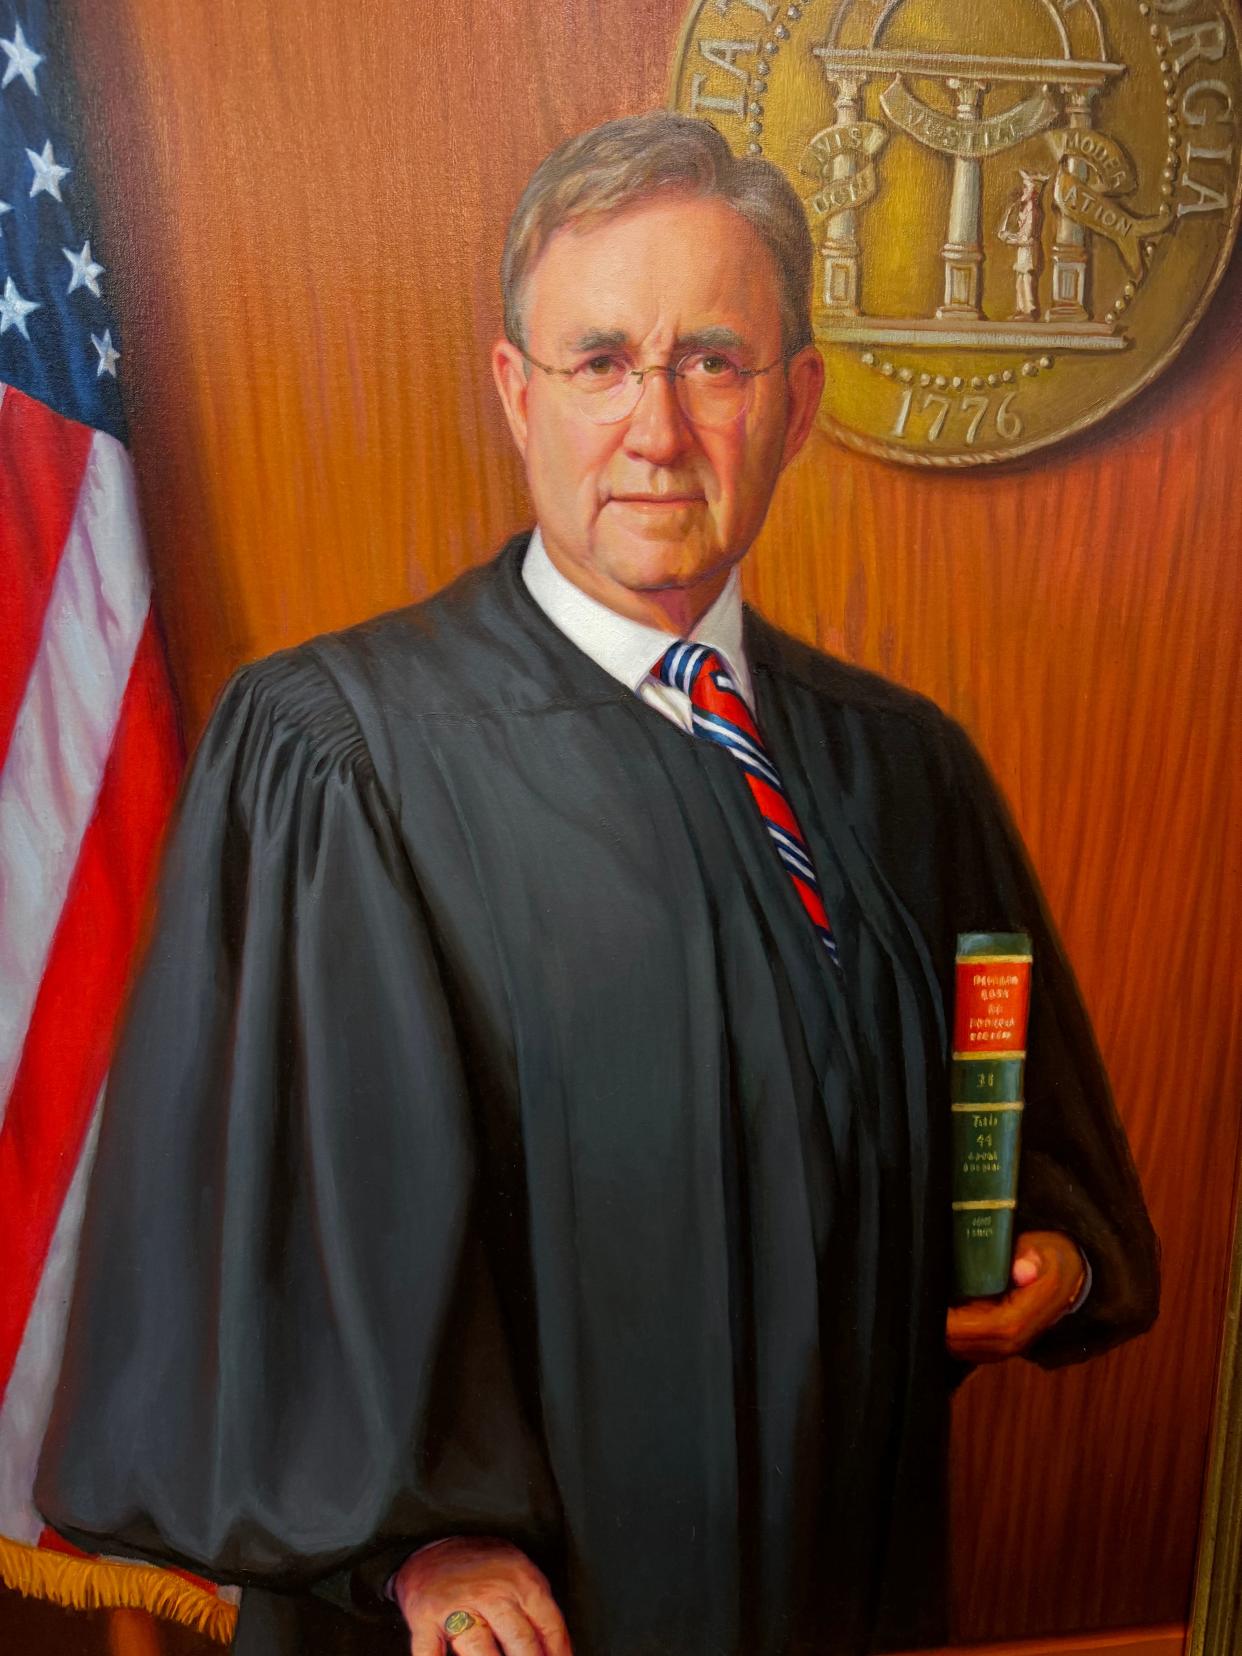 Columbia County Chief Superior Court Judge James G. Blanchard, Jr. in a portrait commissioned prior to his retirement. Blanchard said the portrait will be donated to Columbia County following his retirement.